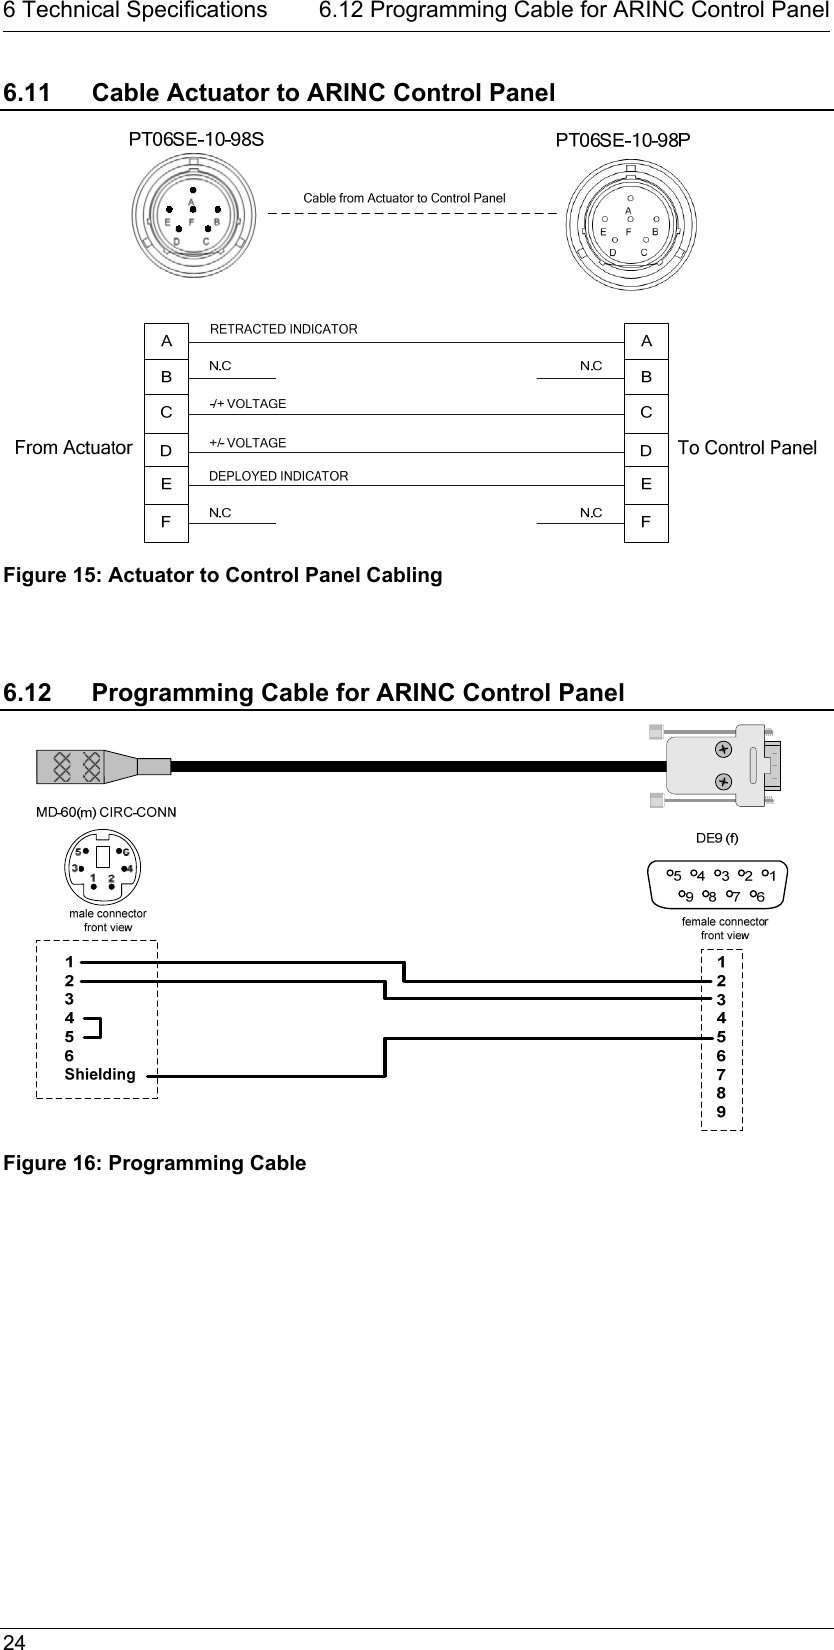   24  6 Technical Specifications  6.12 Programming Cable for ARINC Control Panel6.11  Cable Actuator to ARINC Control Panel  Figure 15: Actuator to Control Panel Cabling   6.12  Programming Cable for ARINC Control Panel  Figure 16: Programming Cable  